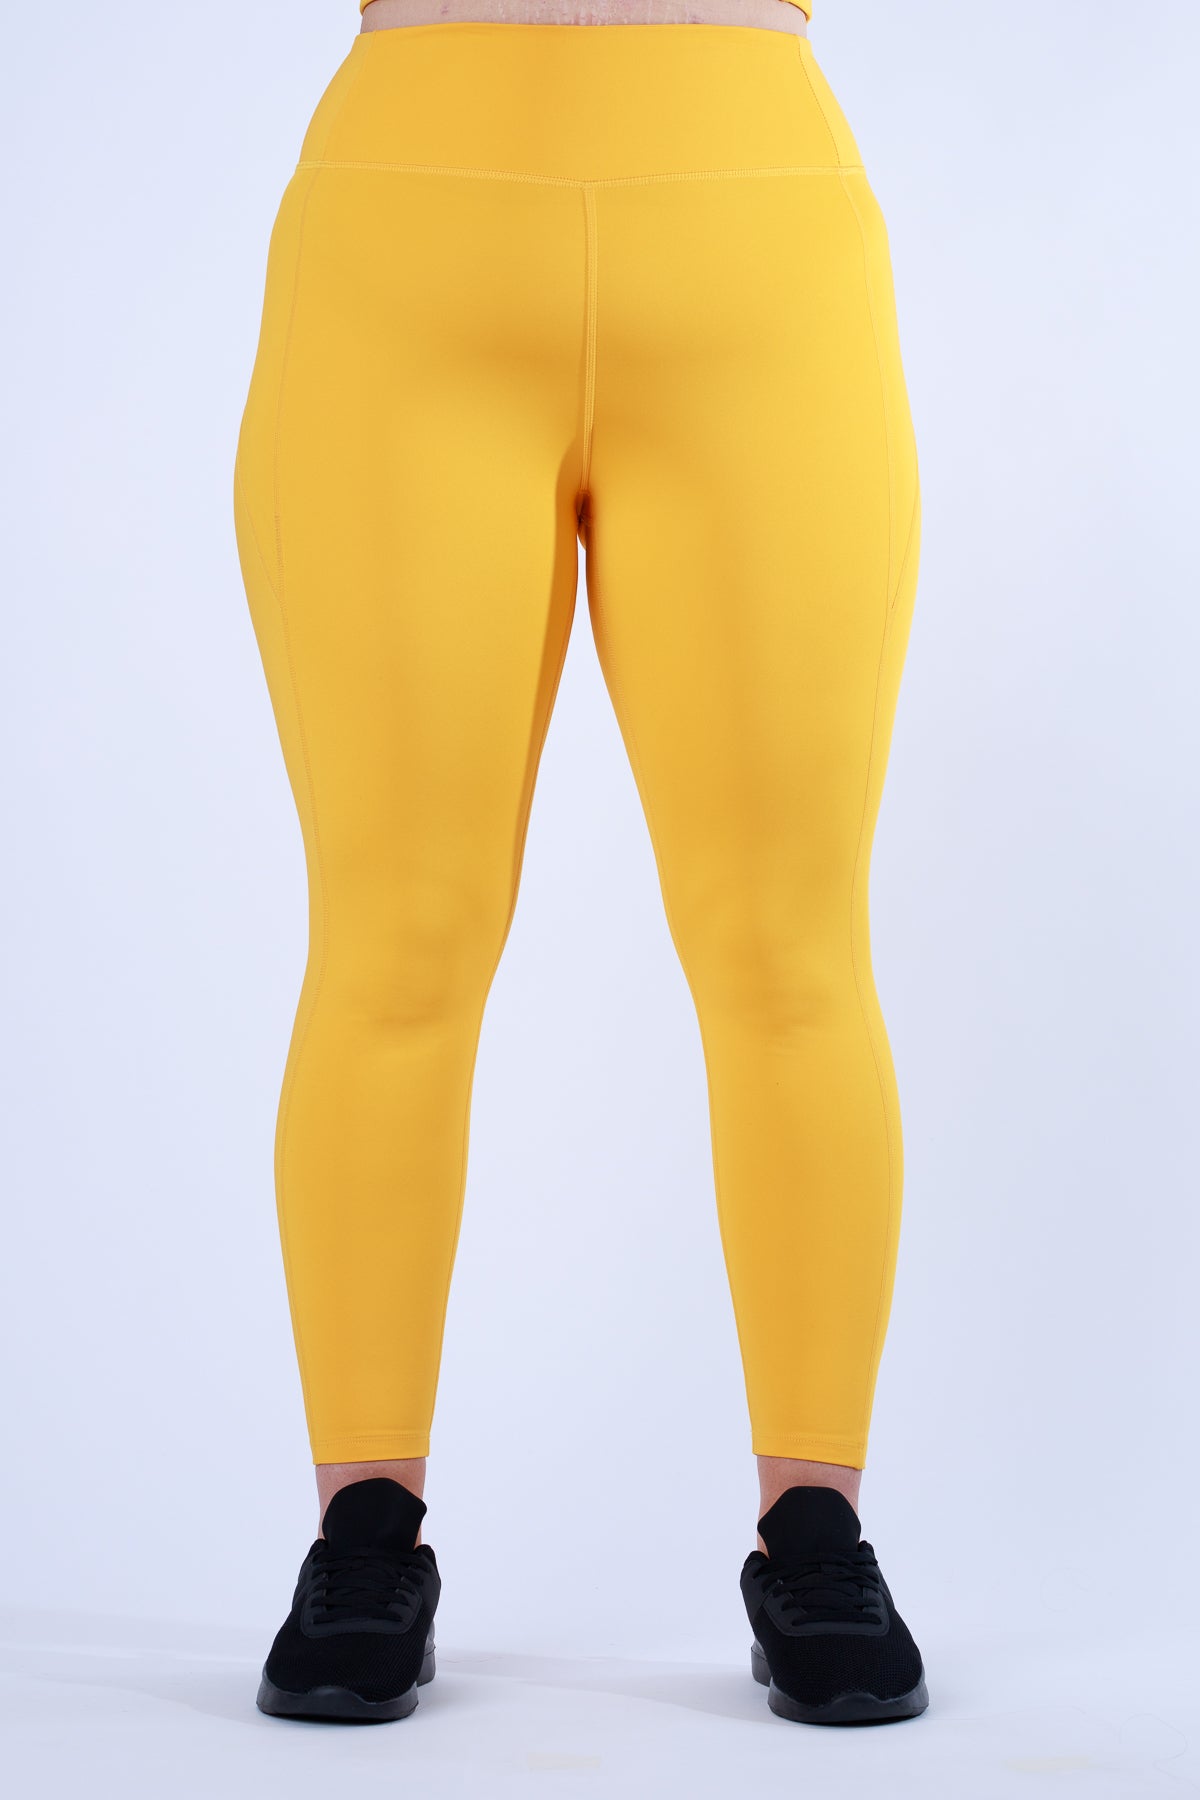 Leonard Vintage Leggings 1980s Fluo Stretch Leggings Shiny Yellow Pants  High Waist Made in Italy NOS Size 2/3 